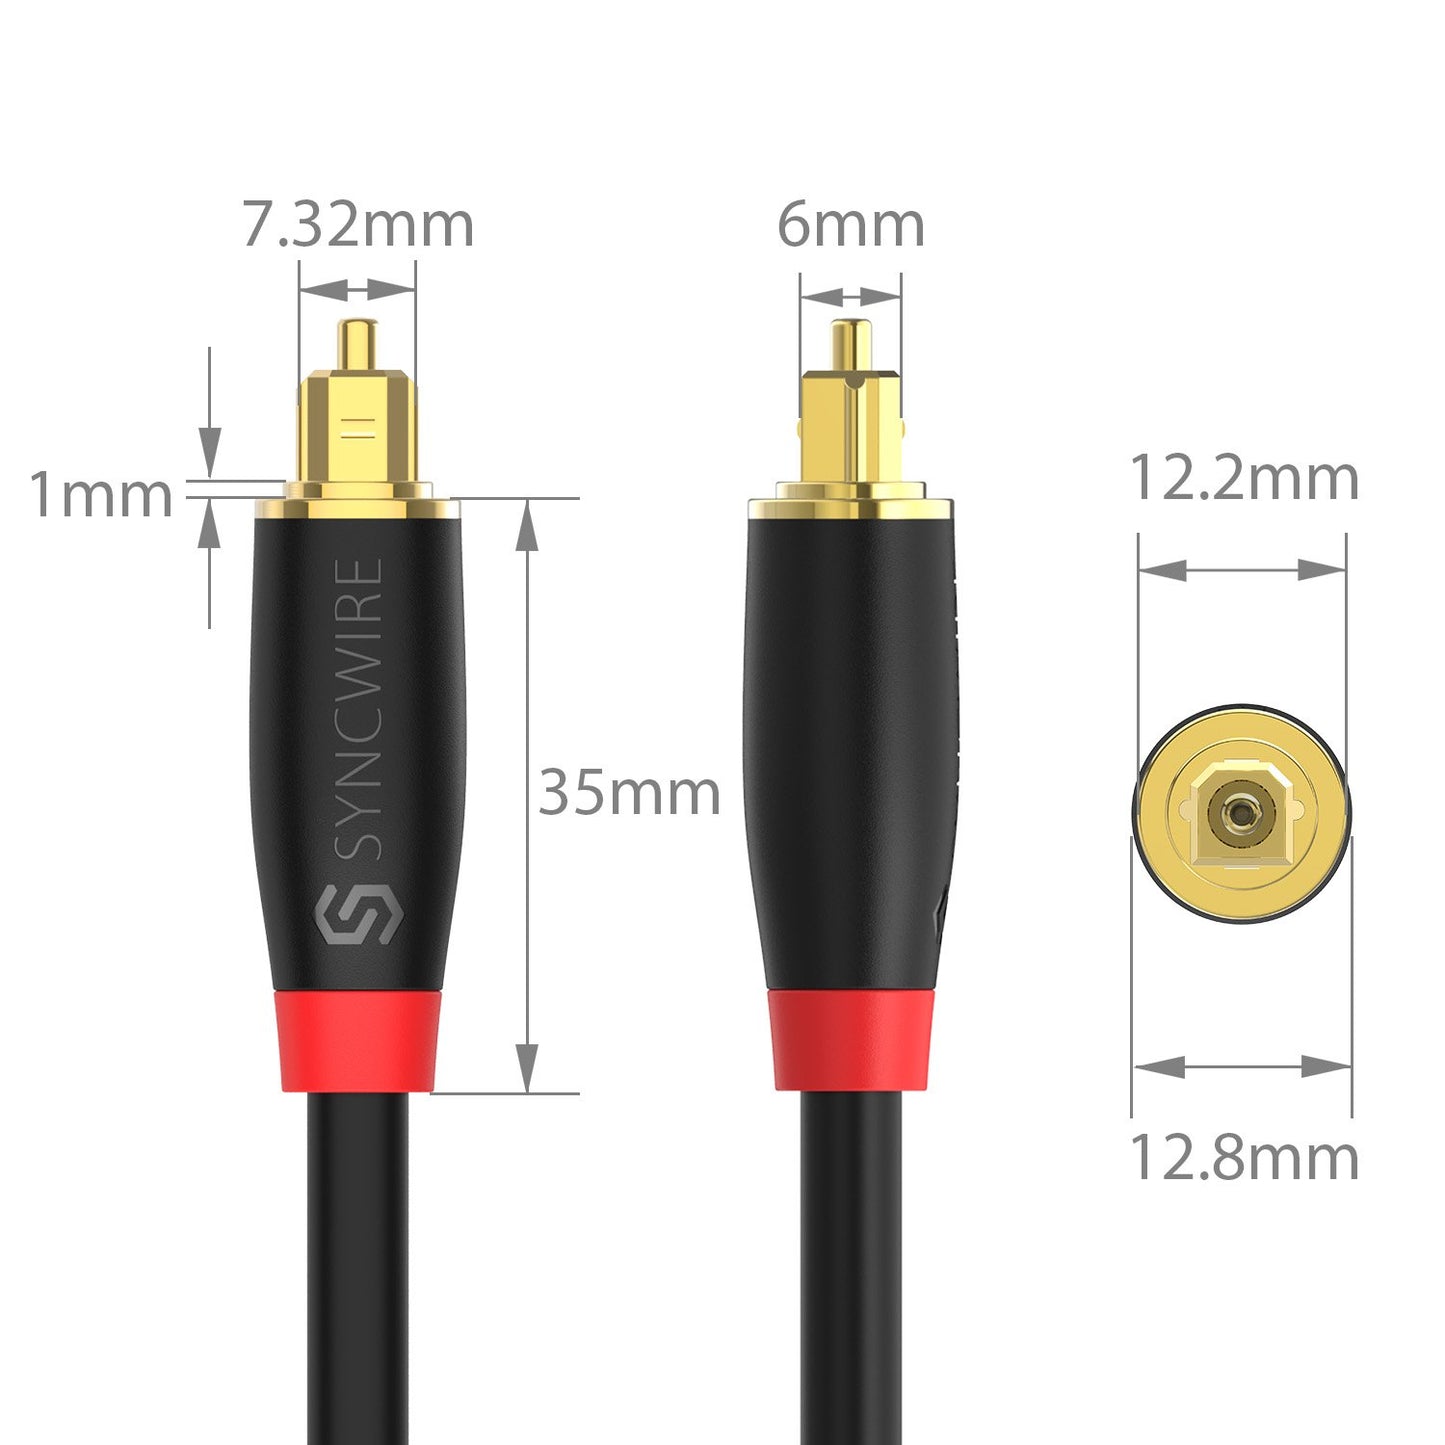 Digital Optical Audio Cable Toslink Cable - [24K Gold-Plated, Ultra-Durable] [S] Syncwire Fiber Optic Male to Male Cord for Home Theater, Sound Bar, TV, PS4, Xbox, Playstation & More – 5.9ft